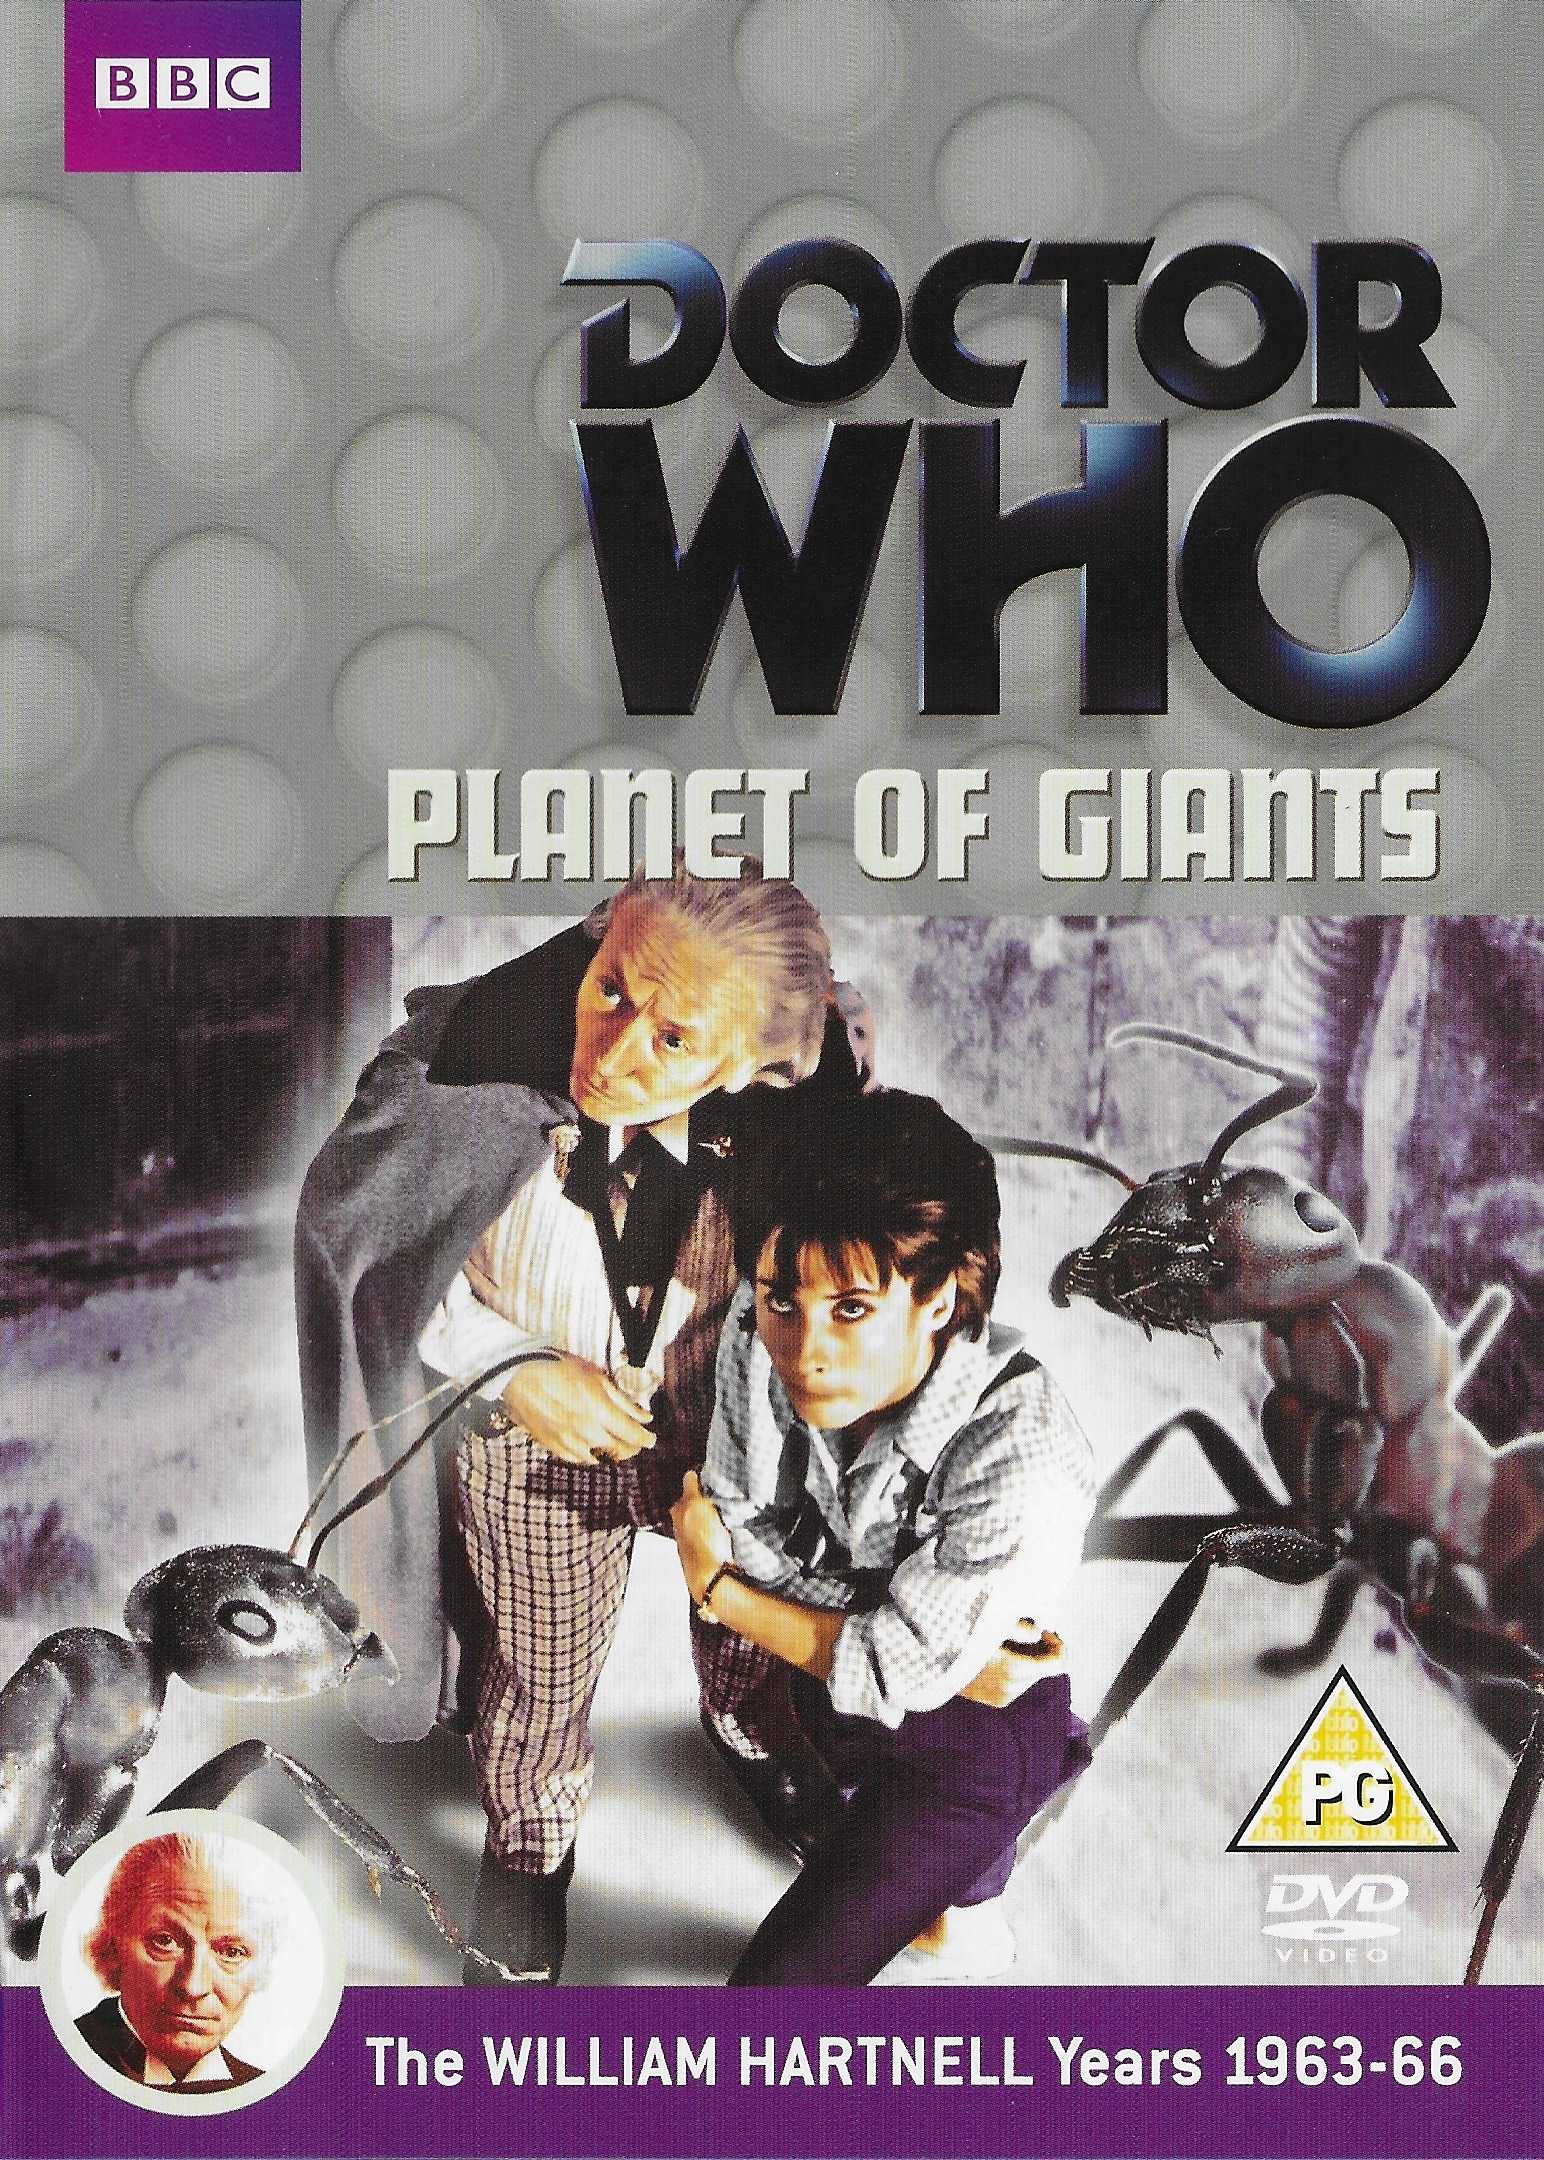 Picture of BBCDVD 3479 Doctor Who - Planet of giants by artist Louis Marks from the BBC records and Tapes library